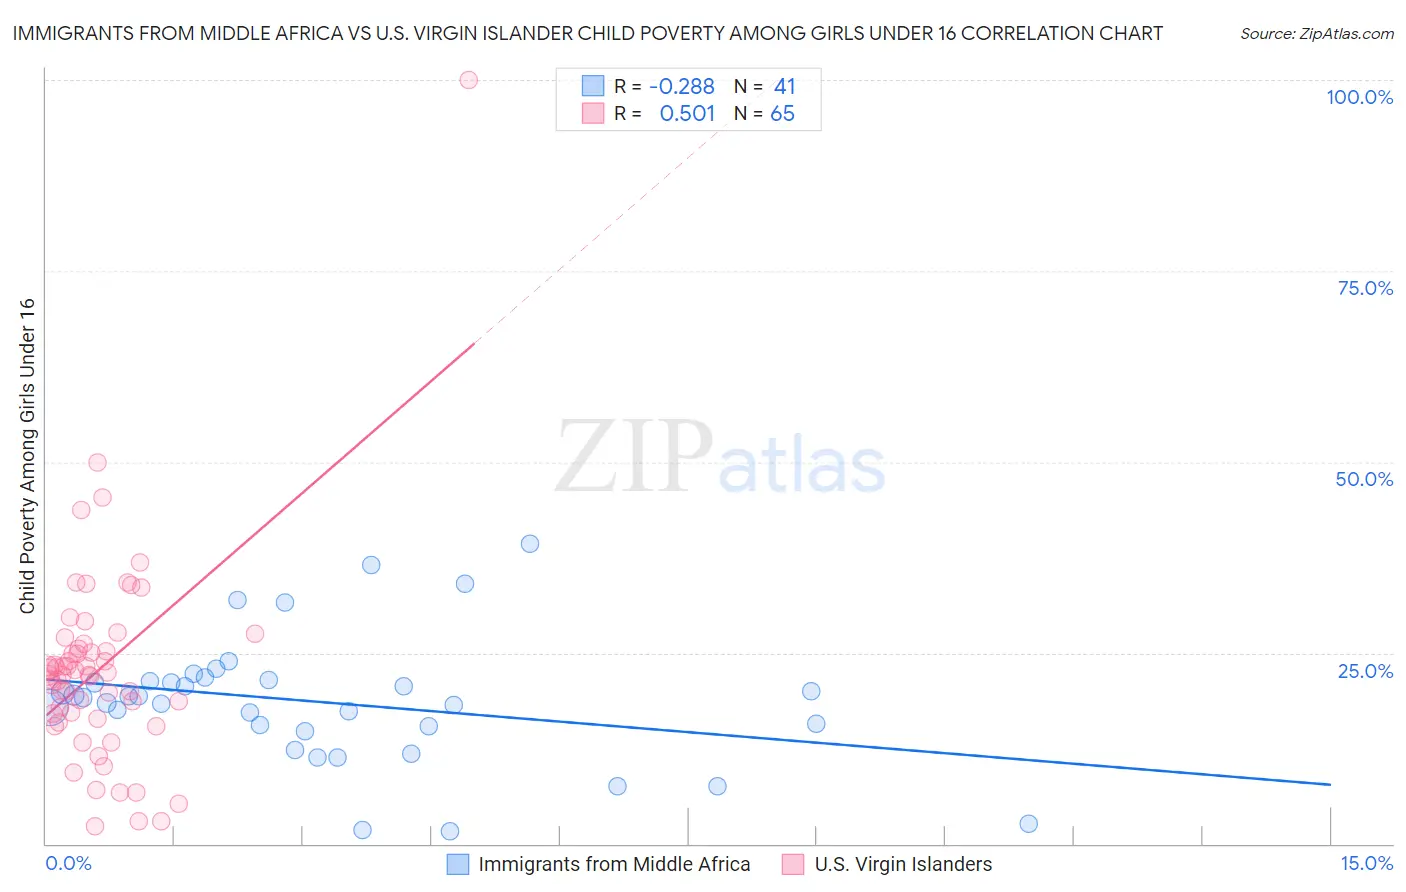 Immigrants from Middle Africa vs U.S. Virgin Islander Child Poverty Among Girls Under 16